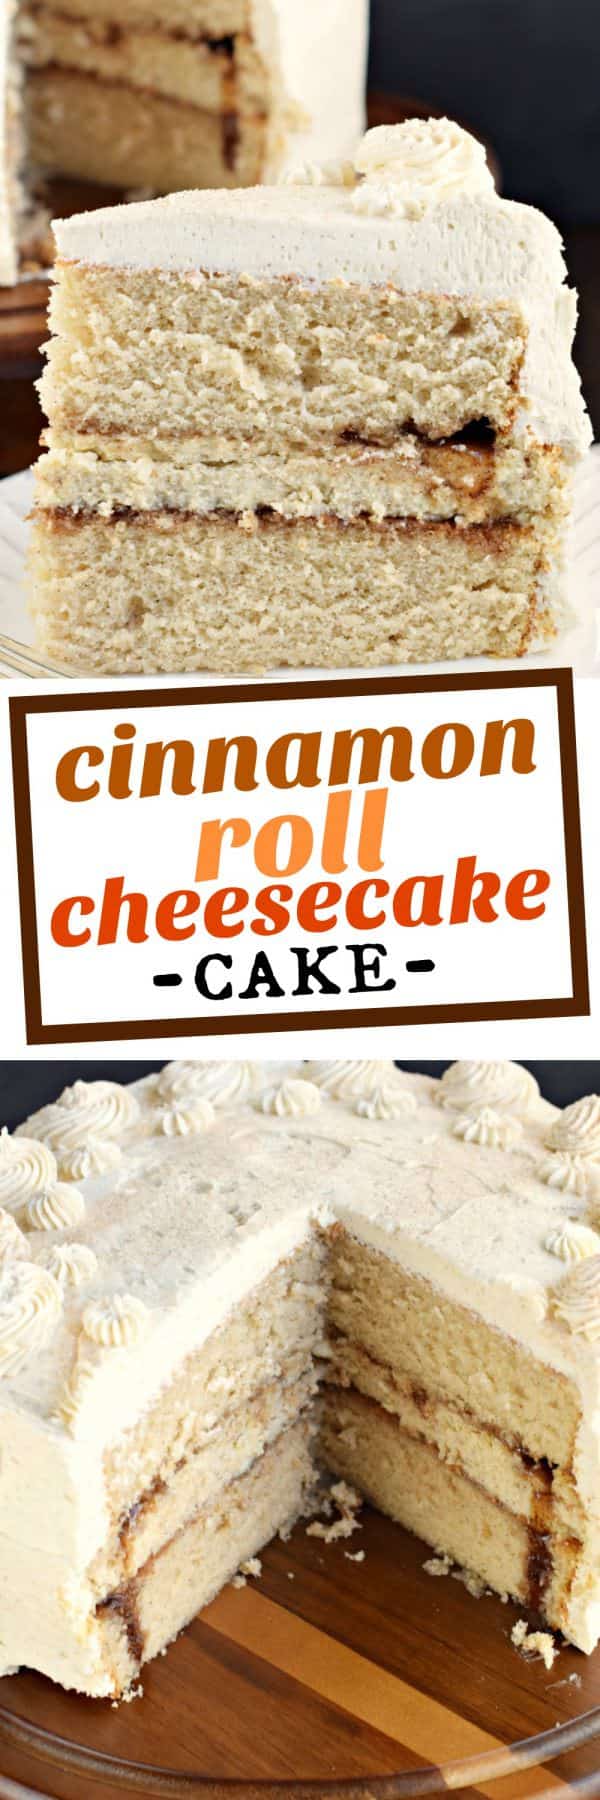 If you're looking for a delicious dessert, give this Cinnamon Roll Cheesecake Cake a try! Layers of homemade cinnamon cake and cinnamon cheesecake topped with a sweet, cinnamon frosting!